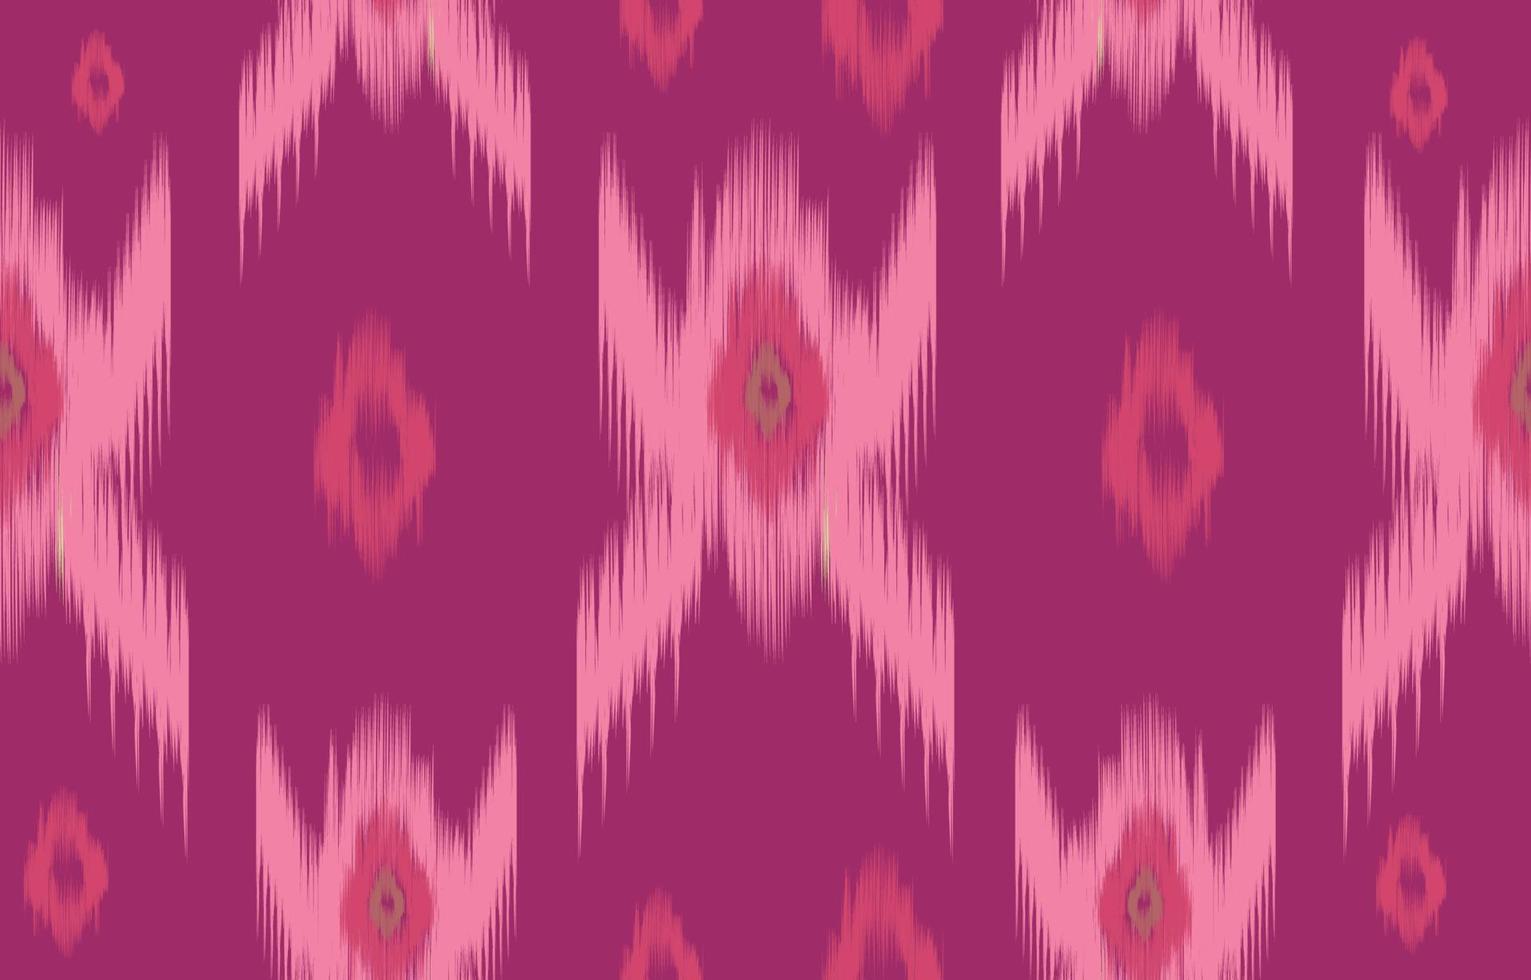 red classic ikat seamless pattern Geometric ethnic oriental  traditional embroidery style.Design for background,carpet,mat,wallpaper,clothing,wrapping,Batik,fabric,Vector illustration. vector